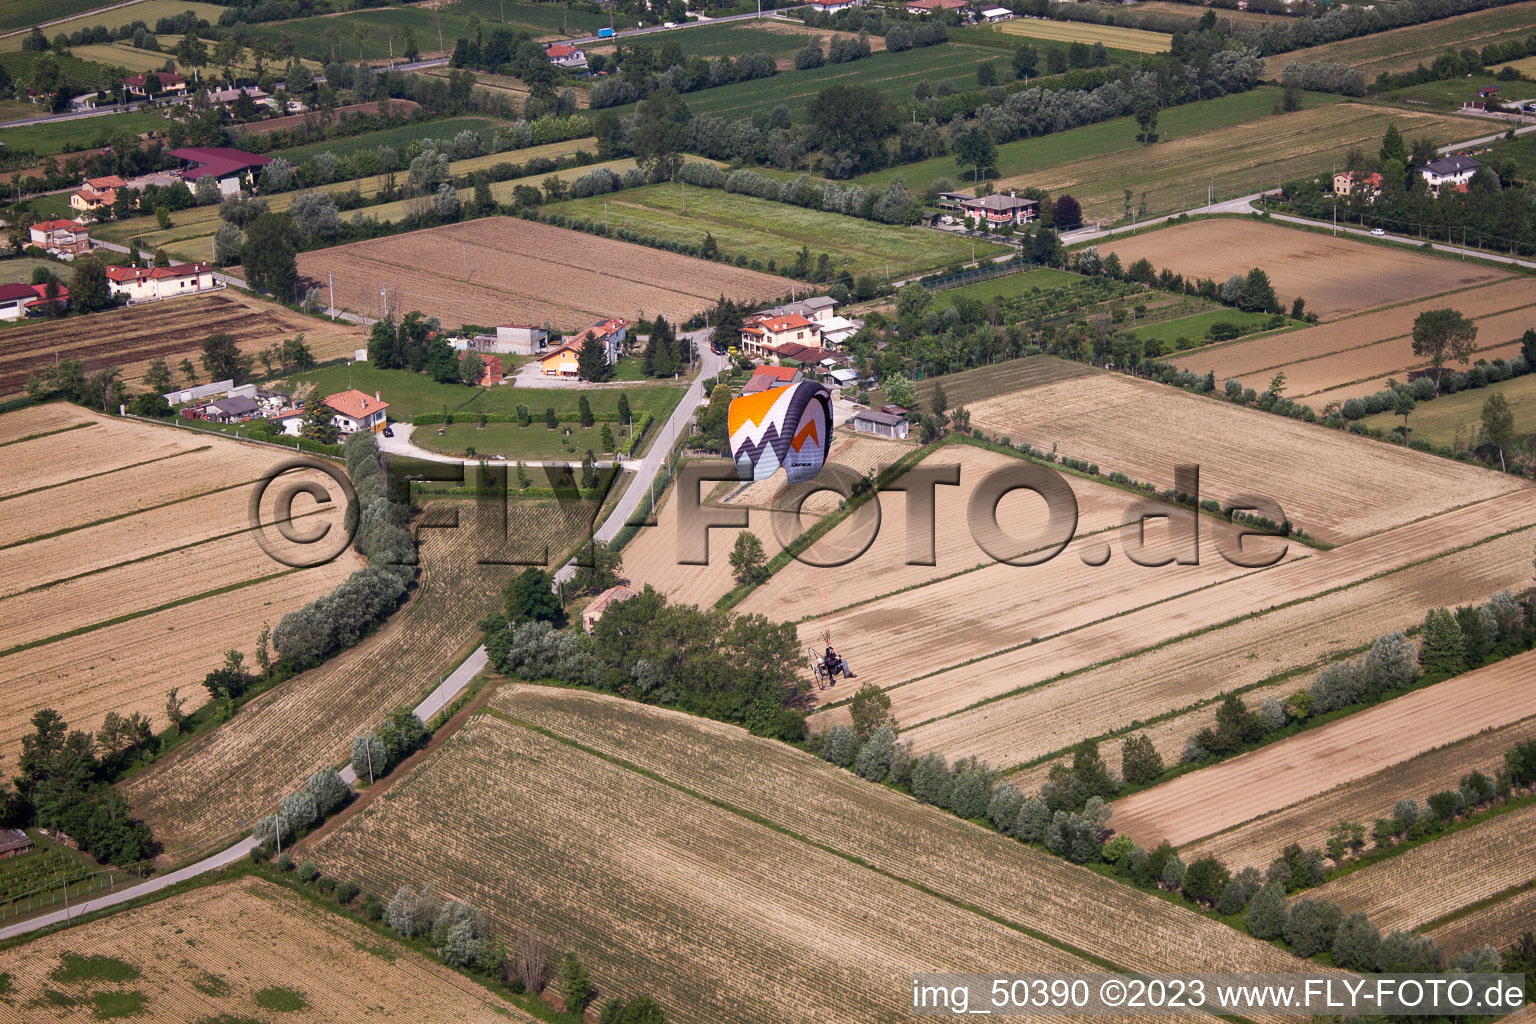 Aerial view of Settimo in the state Veneto, Italy